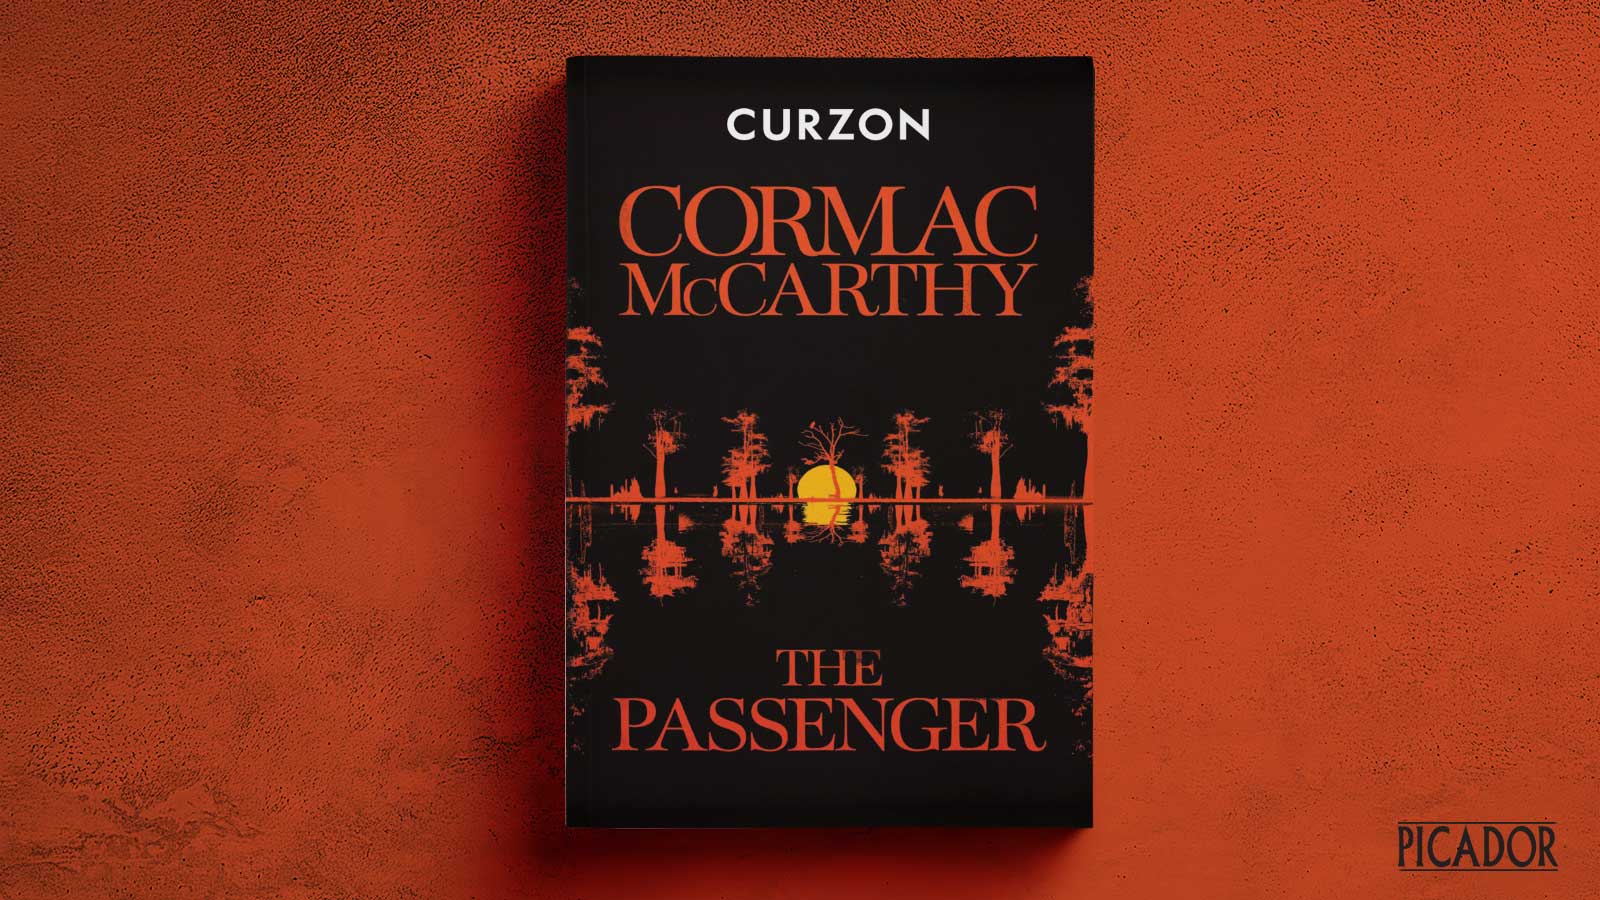 A special proof of Cormac McCarthy's The Passenger on a red background.